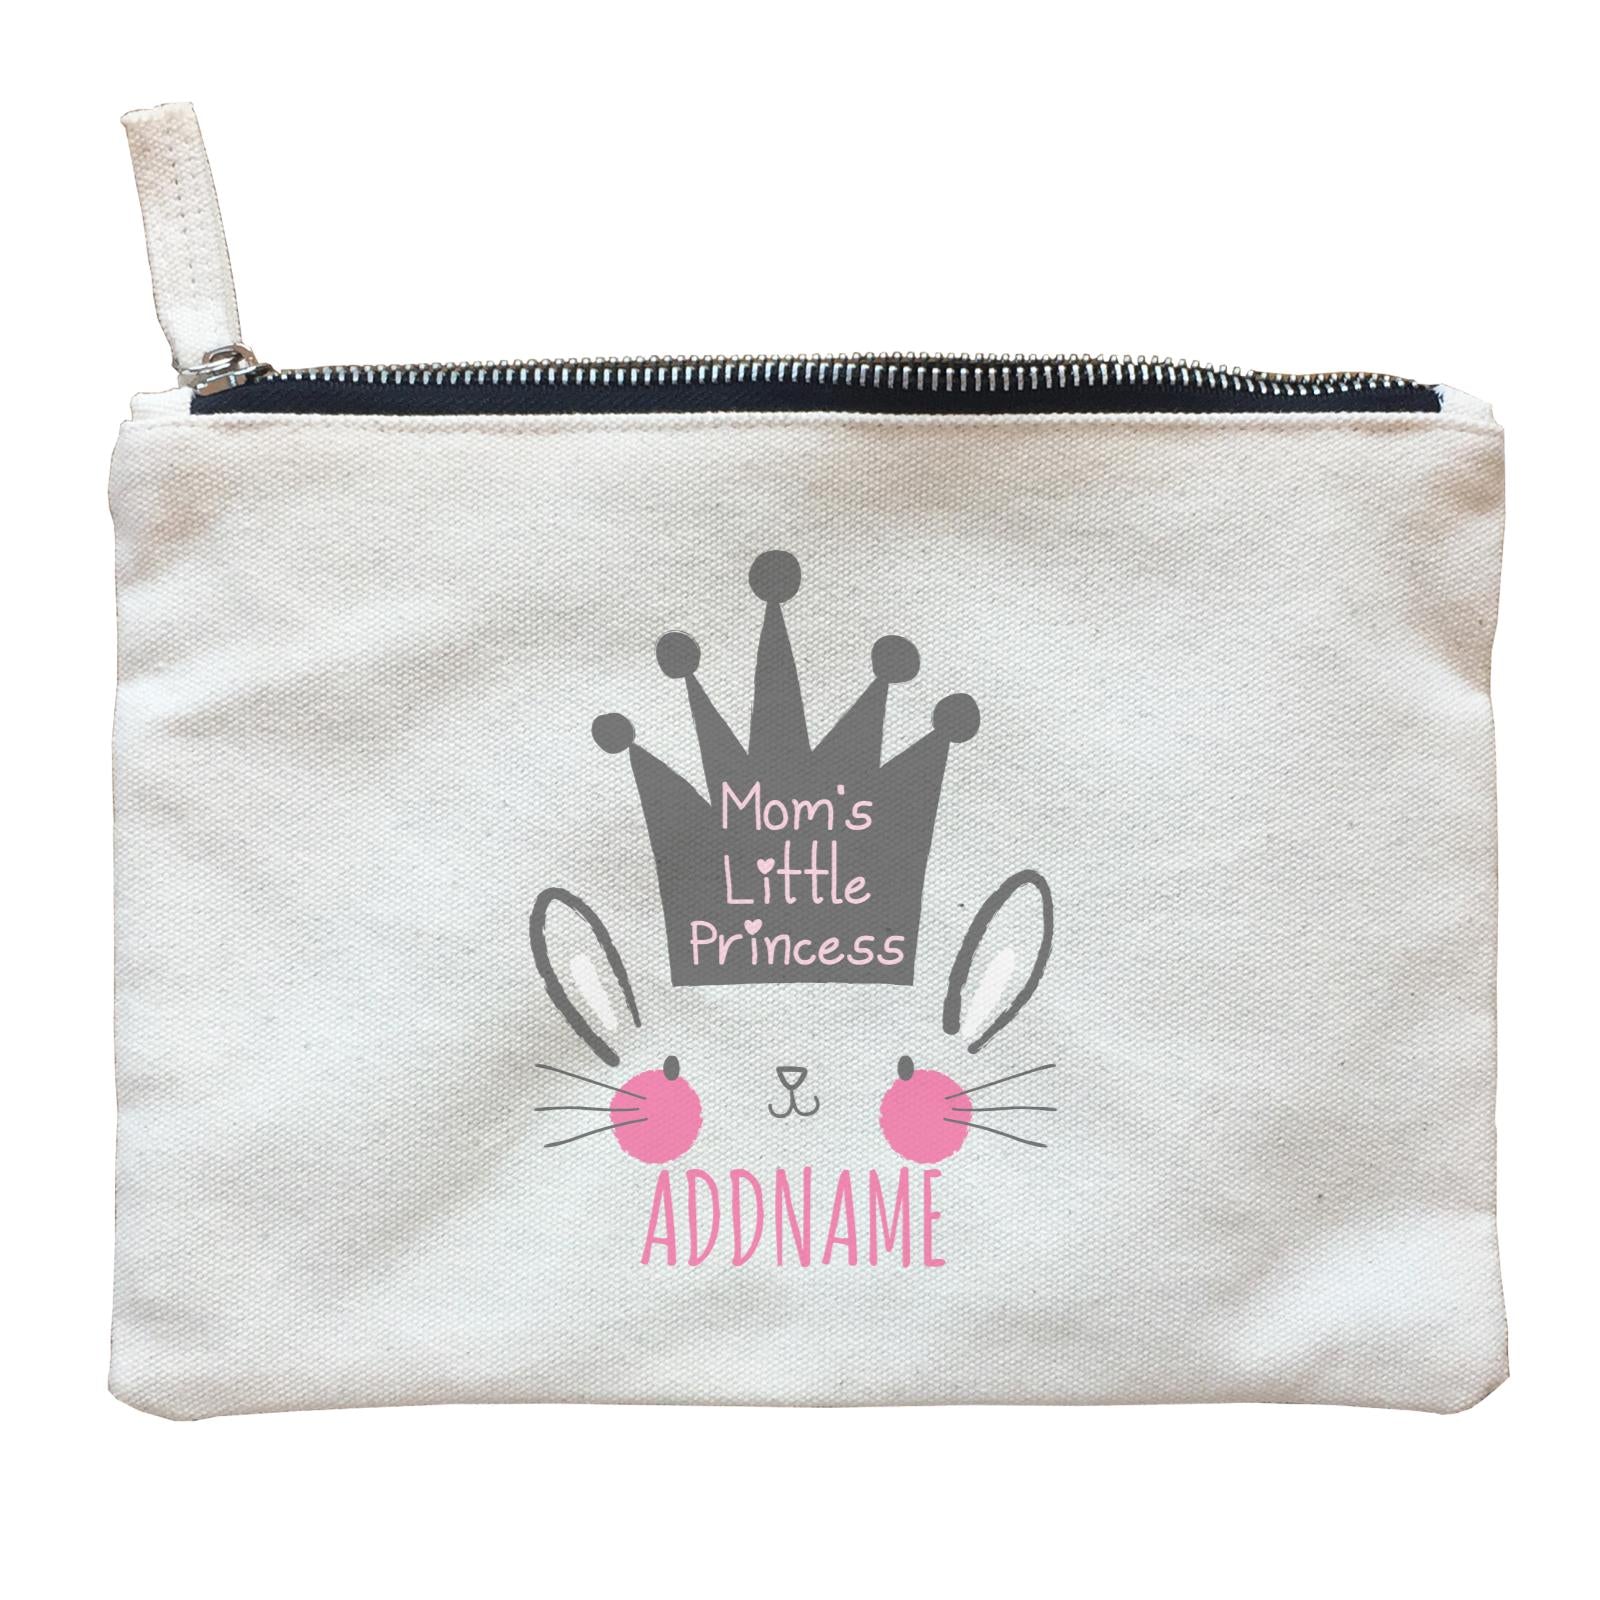 Mom's Little Princess Bunny Addname Zipper Pouch